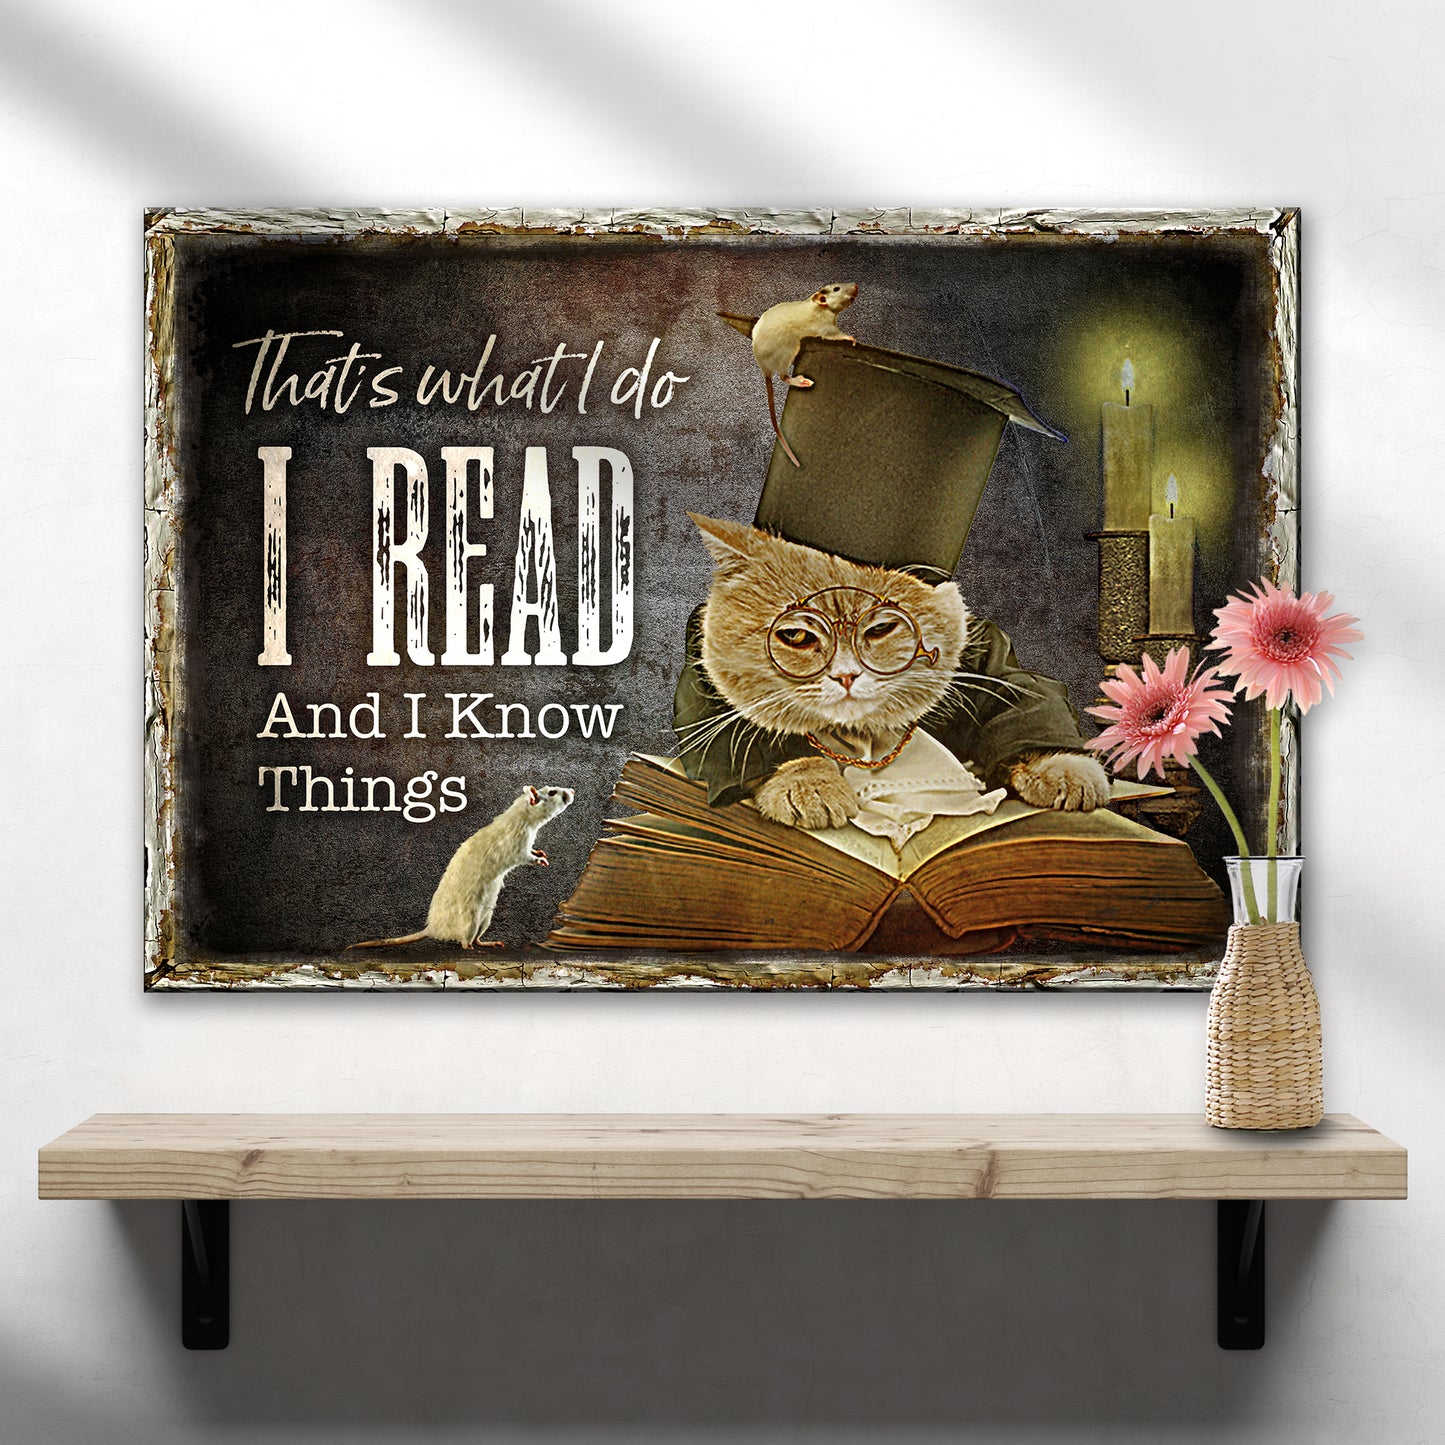 I Read And I Know Things Pet Sign - Image by Tailored Canvases